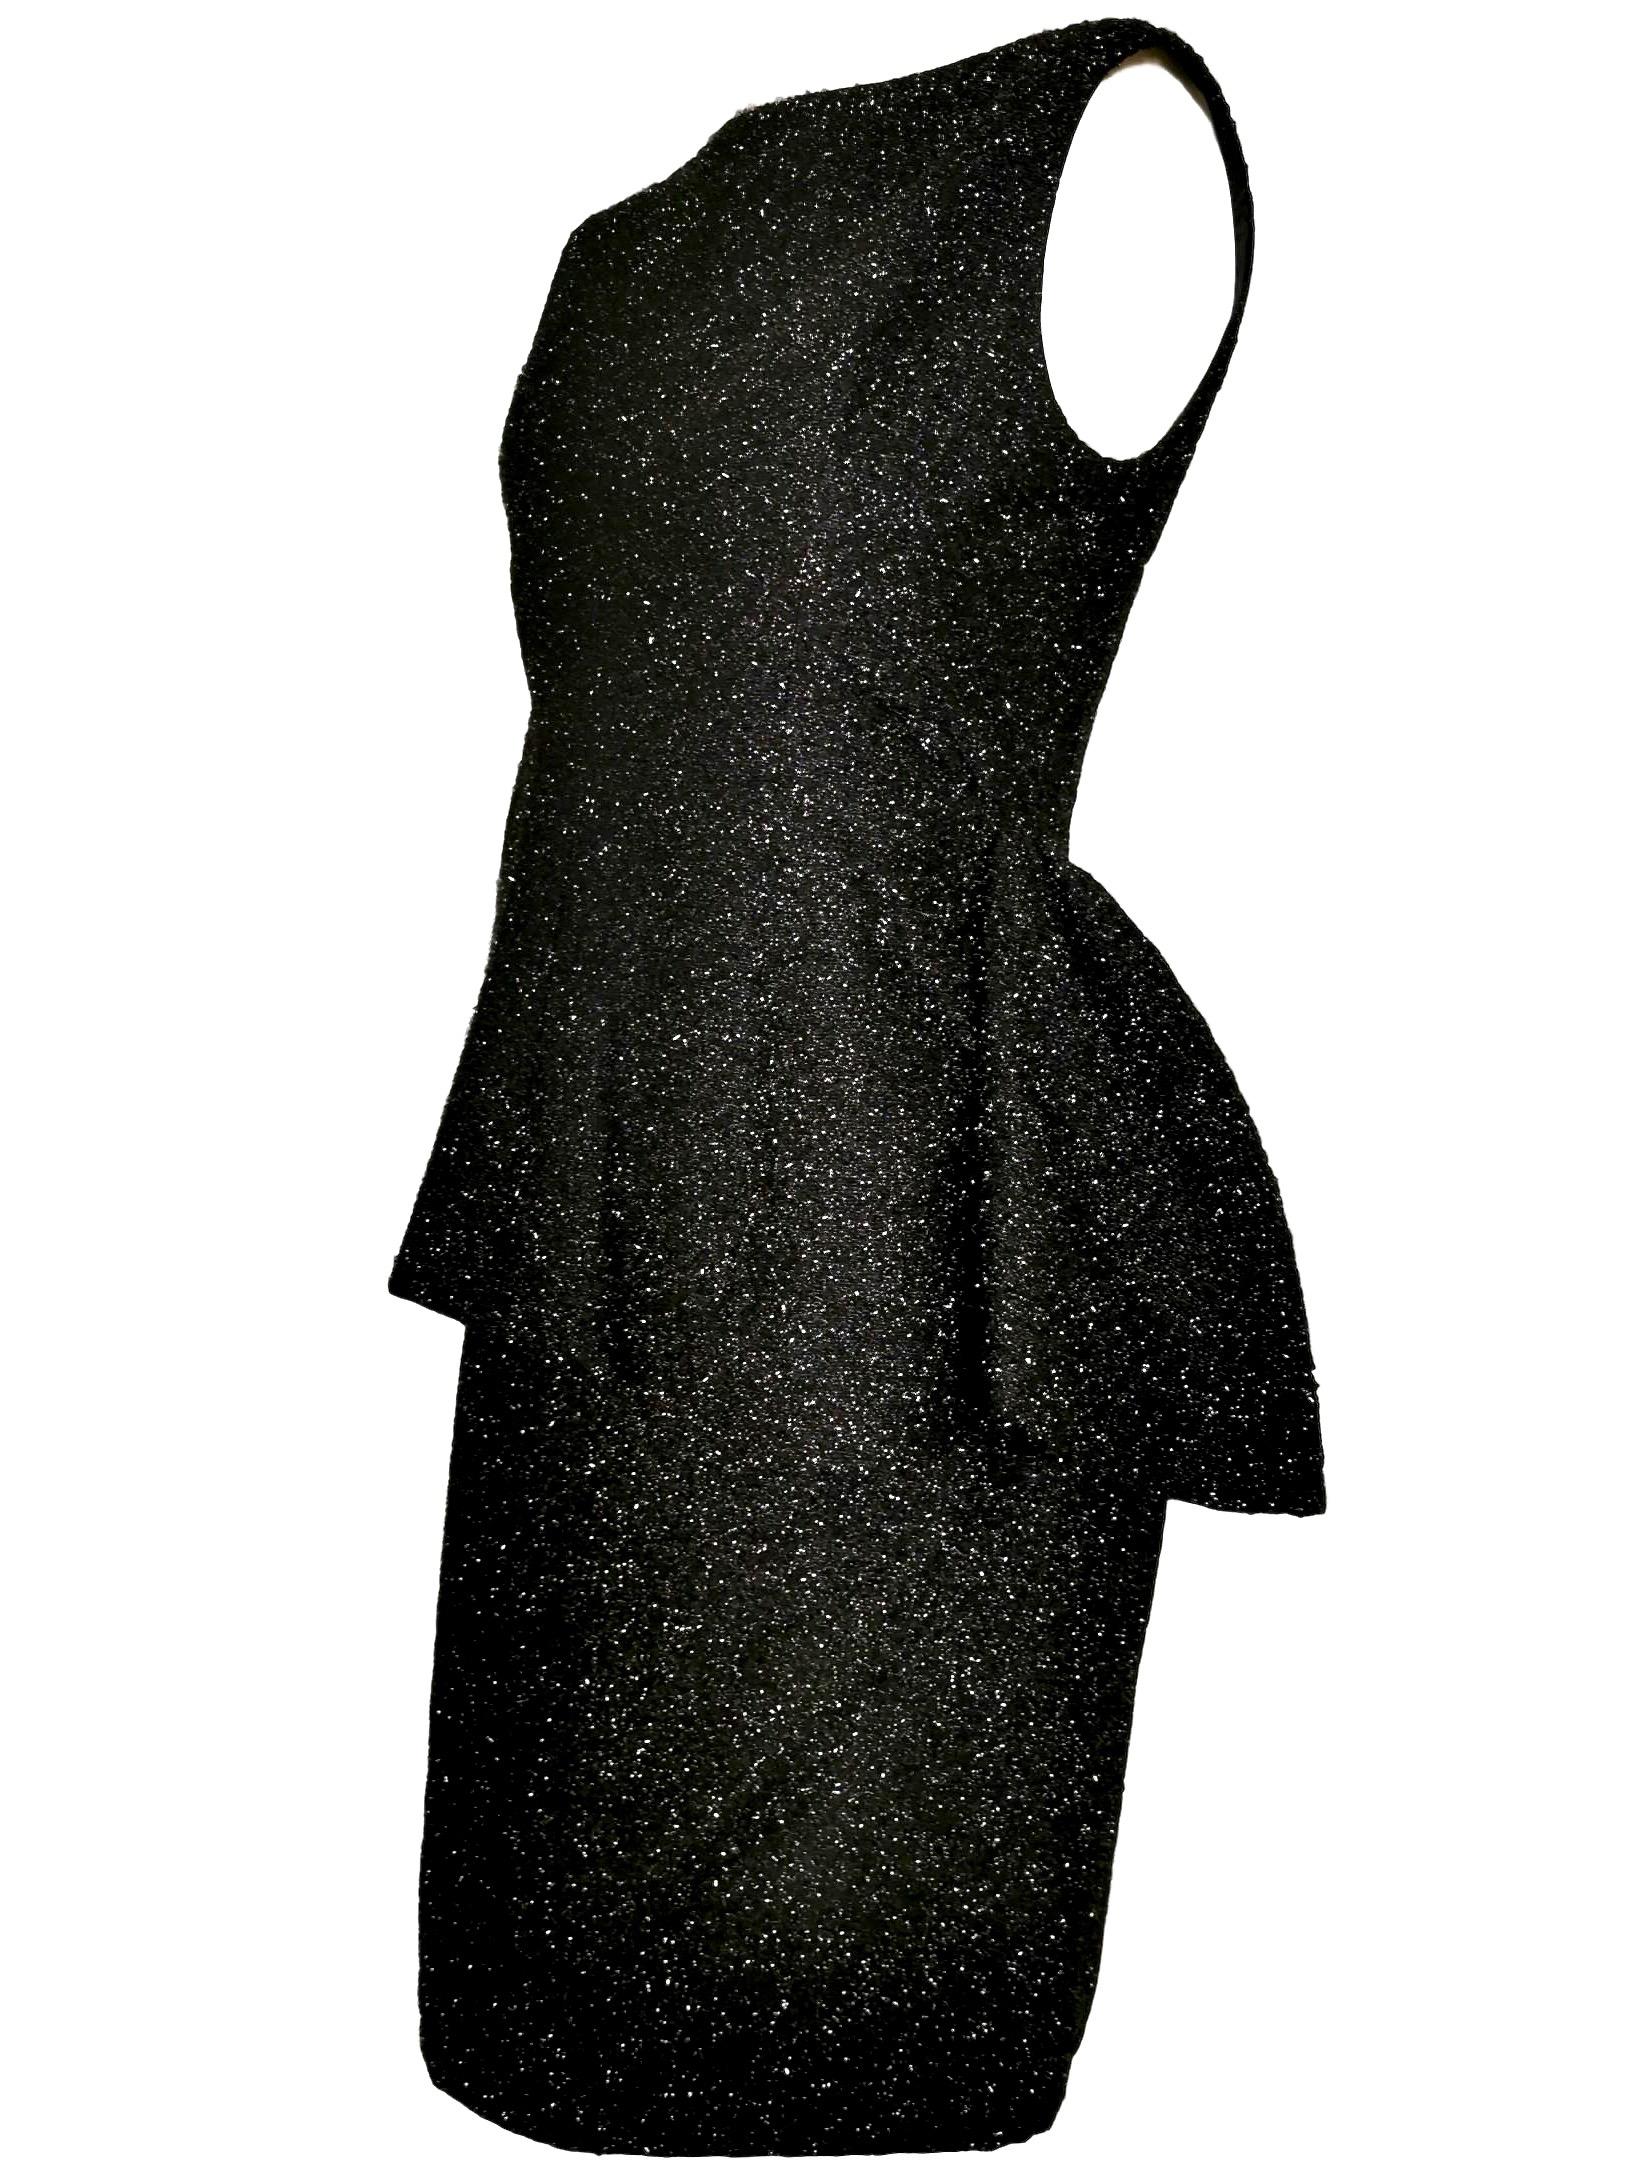 Balenciaga Edition
Hiver 1962
Textured Fabric
Made to Original Couture Design to Couture Standards
Using Original Fabrics of the Collection
Size 40